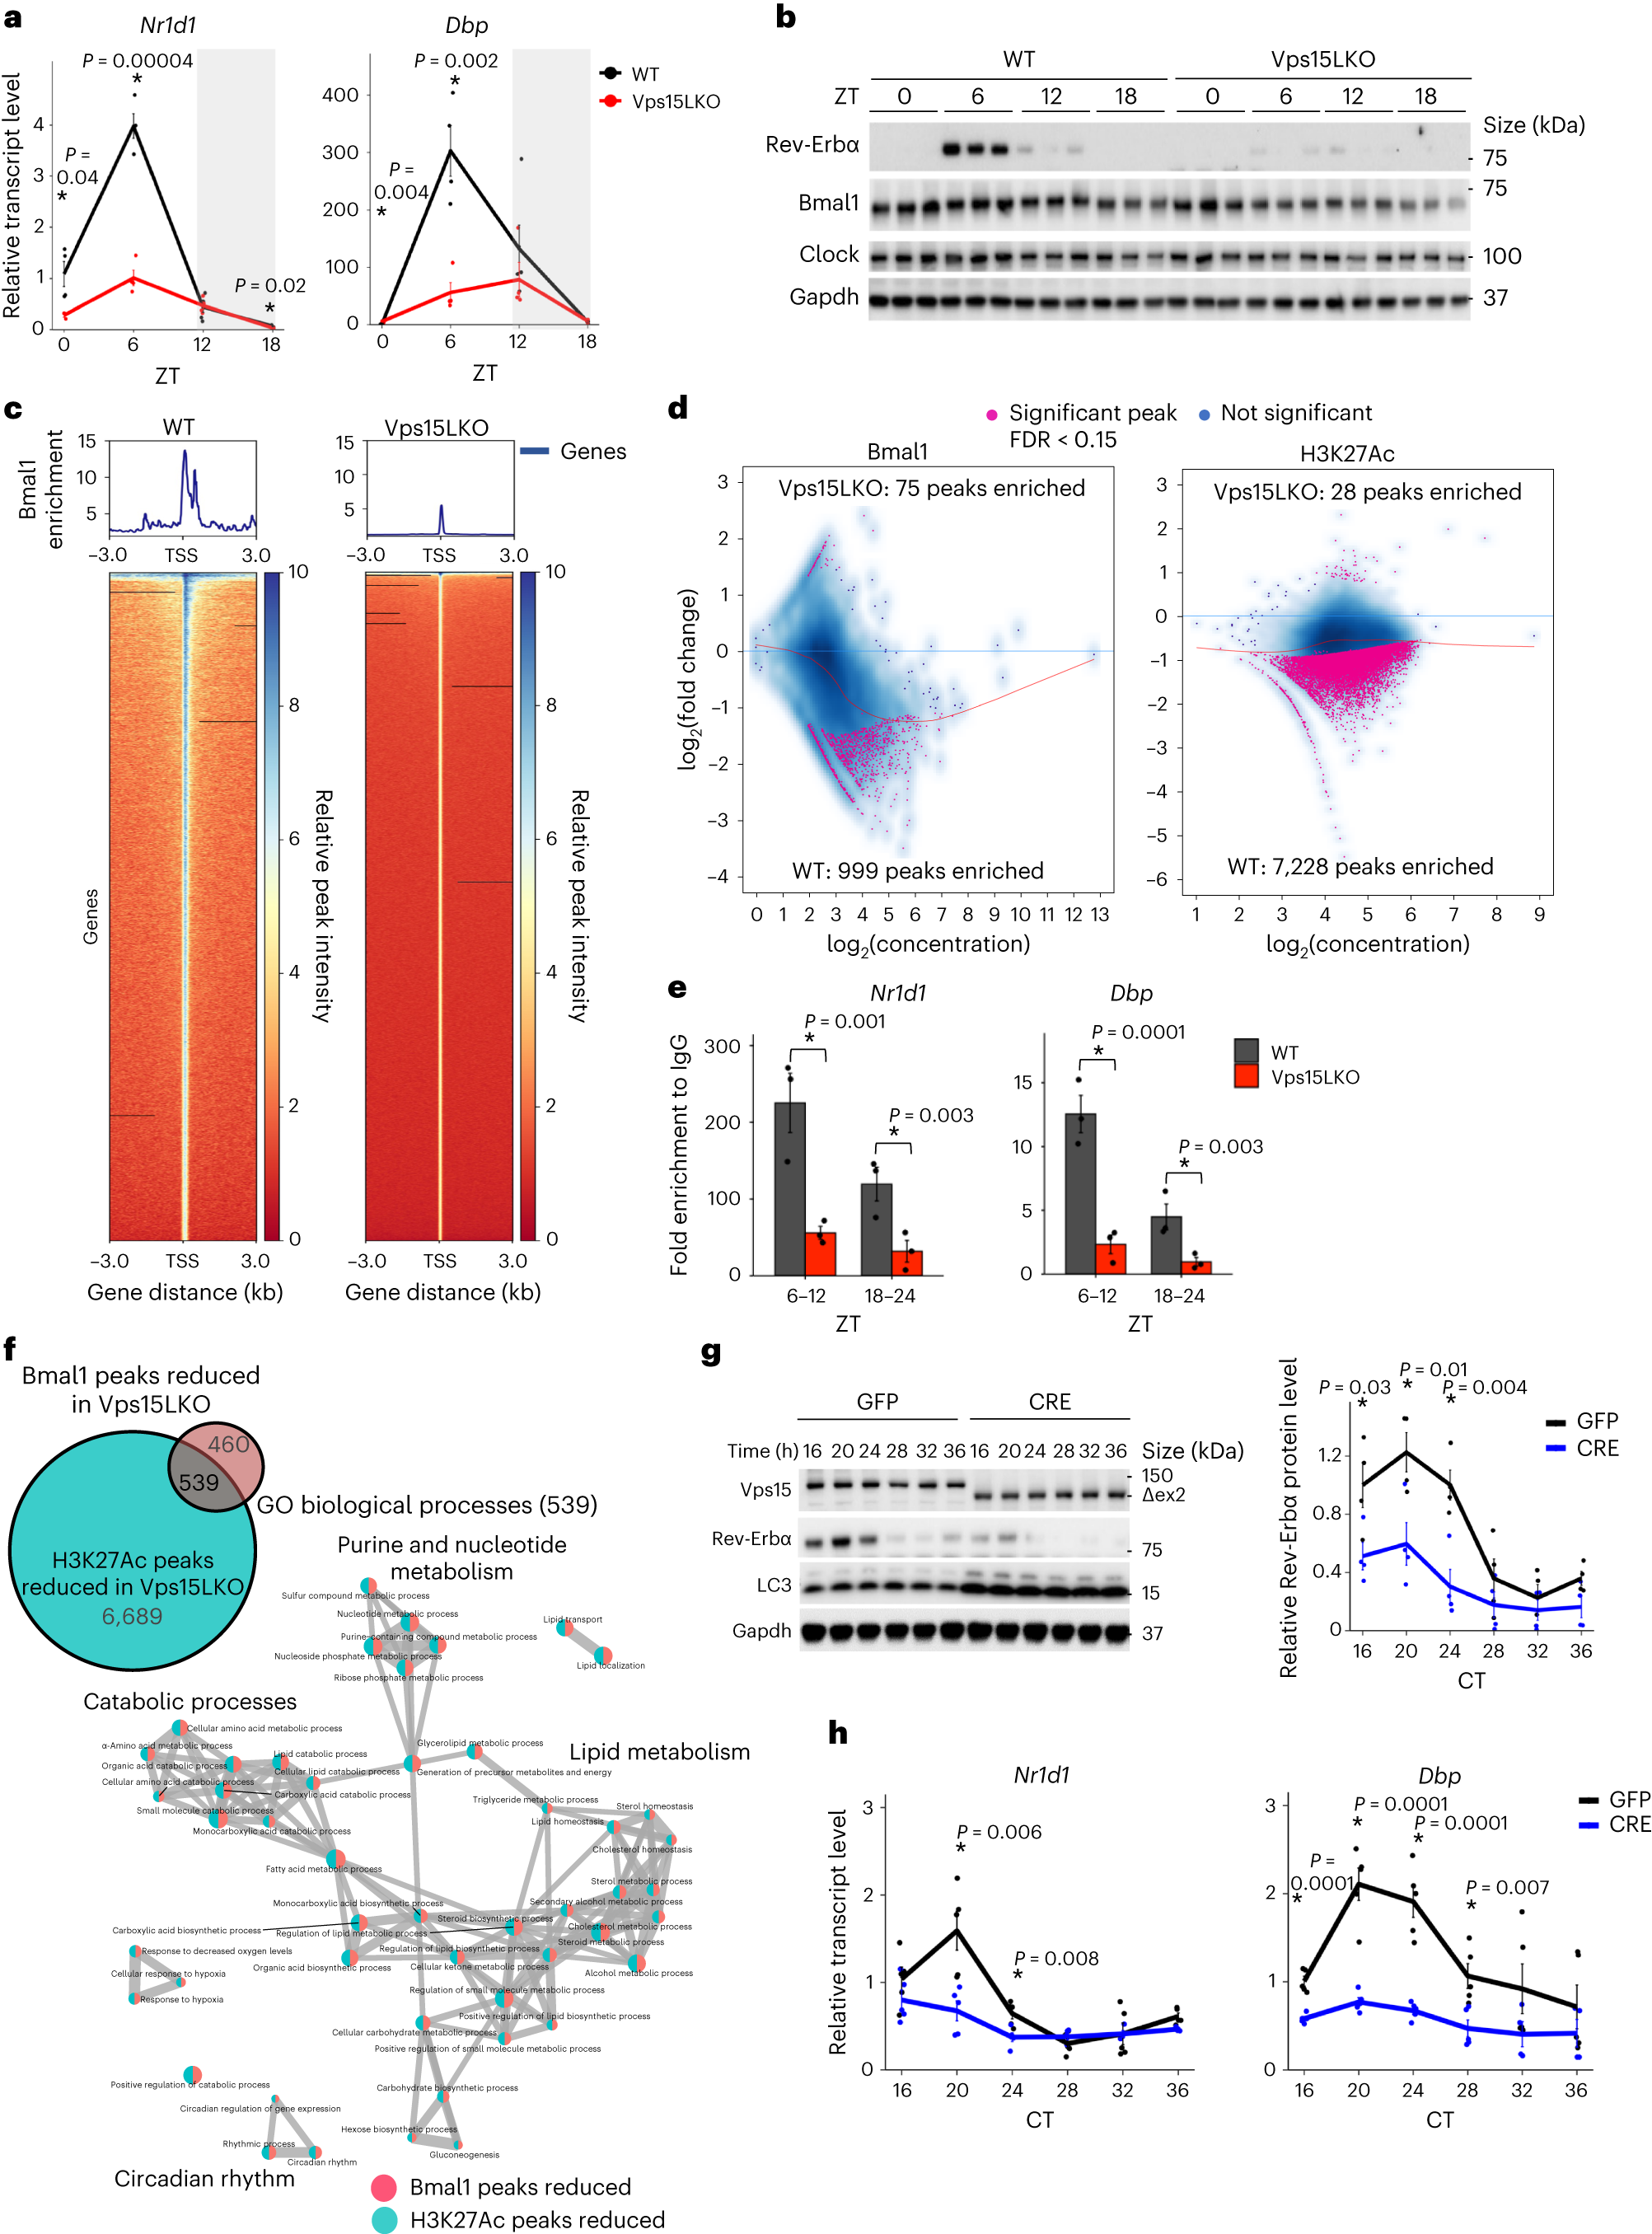 Class 3 PI3K coactivates the circadian clock to promote rhythmic de novo  purine synthesis | Nature Cell Biology